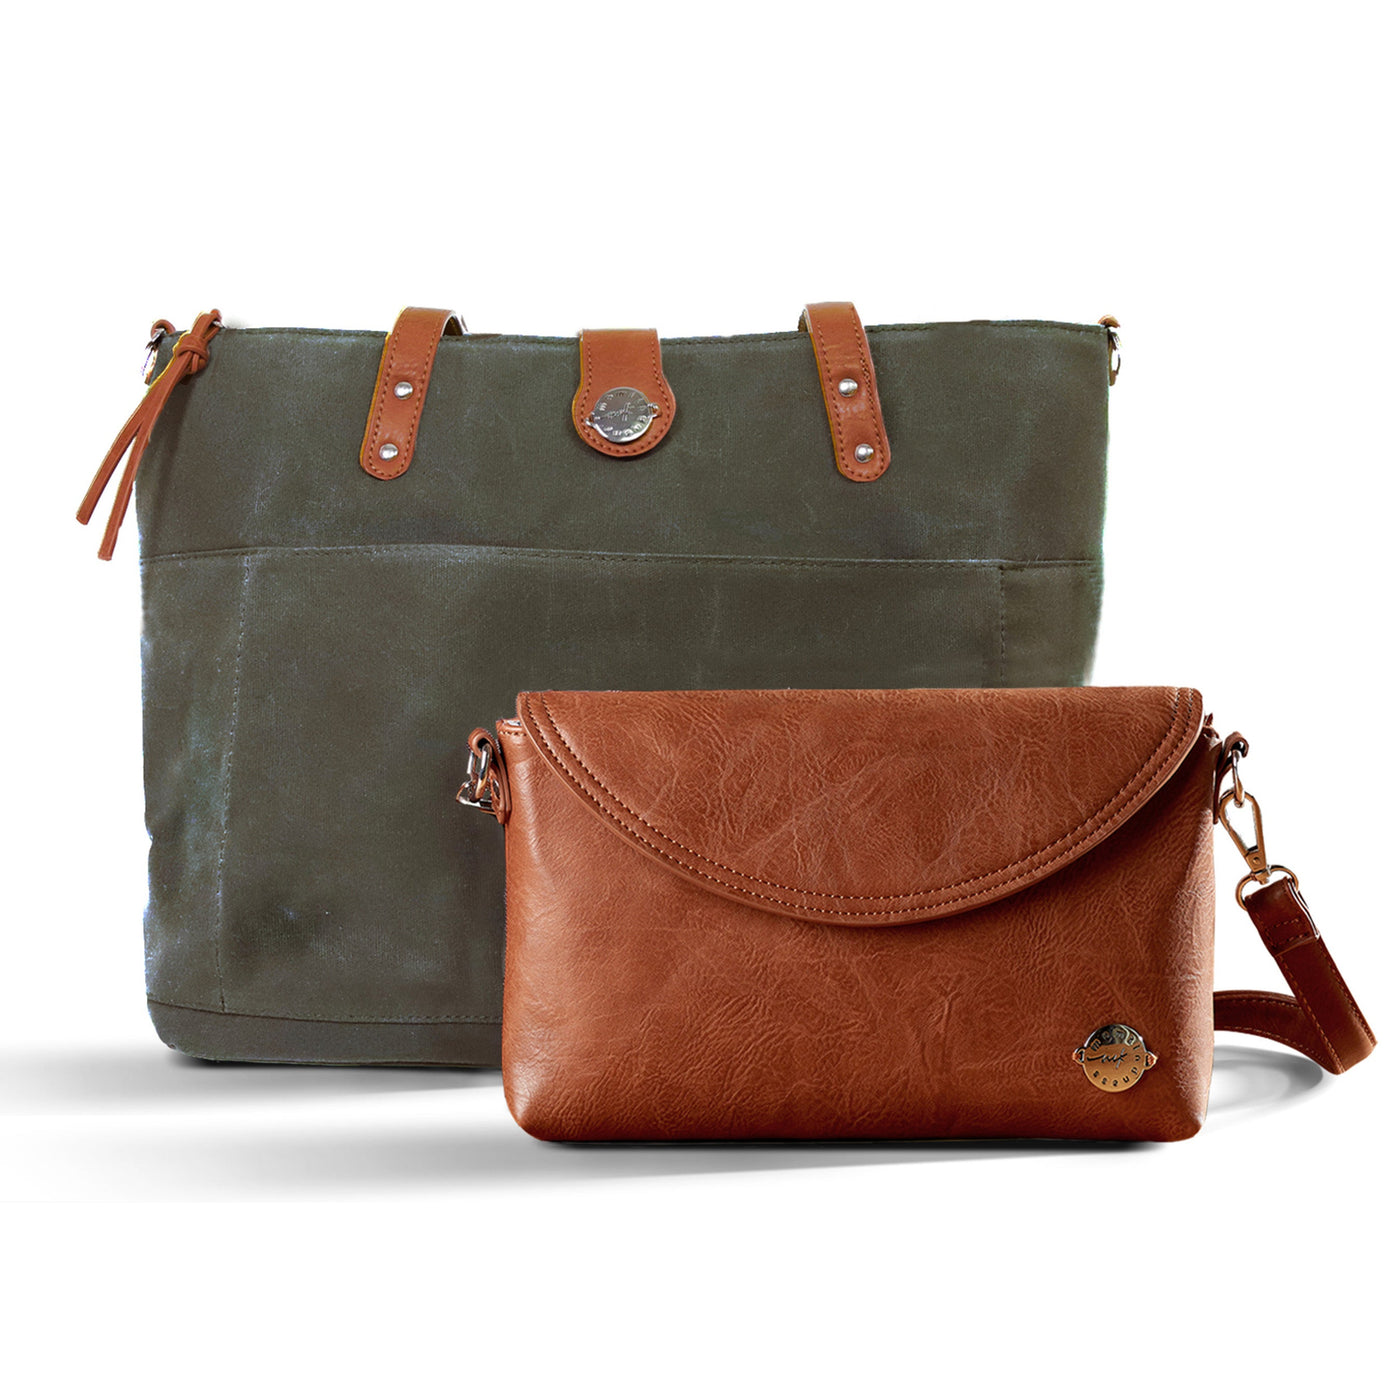 Forest green waxed canvas tote with brown vegan leather accents and brown vegan leather diaper clutch, all on a white background.